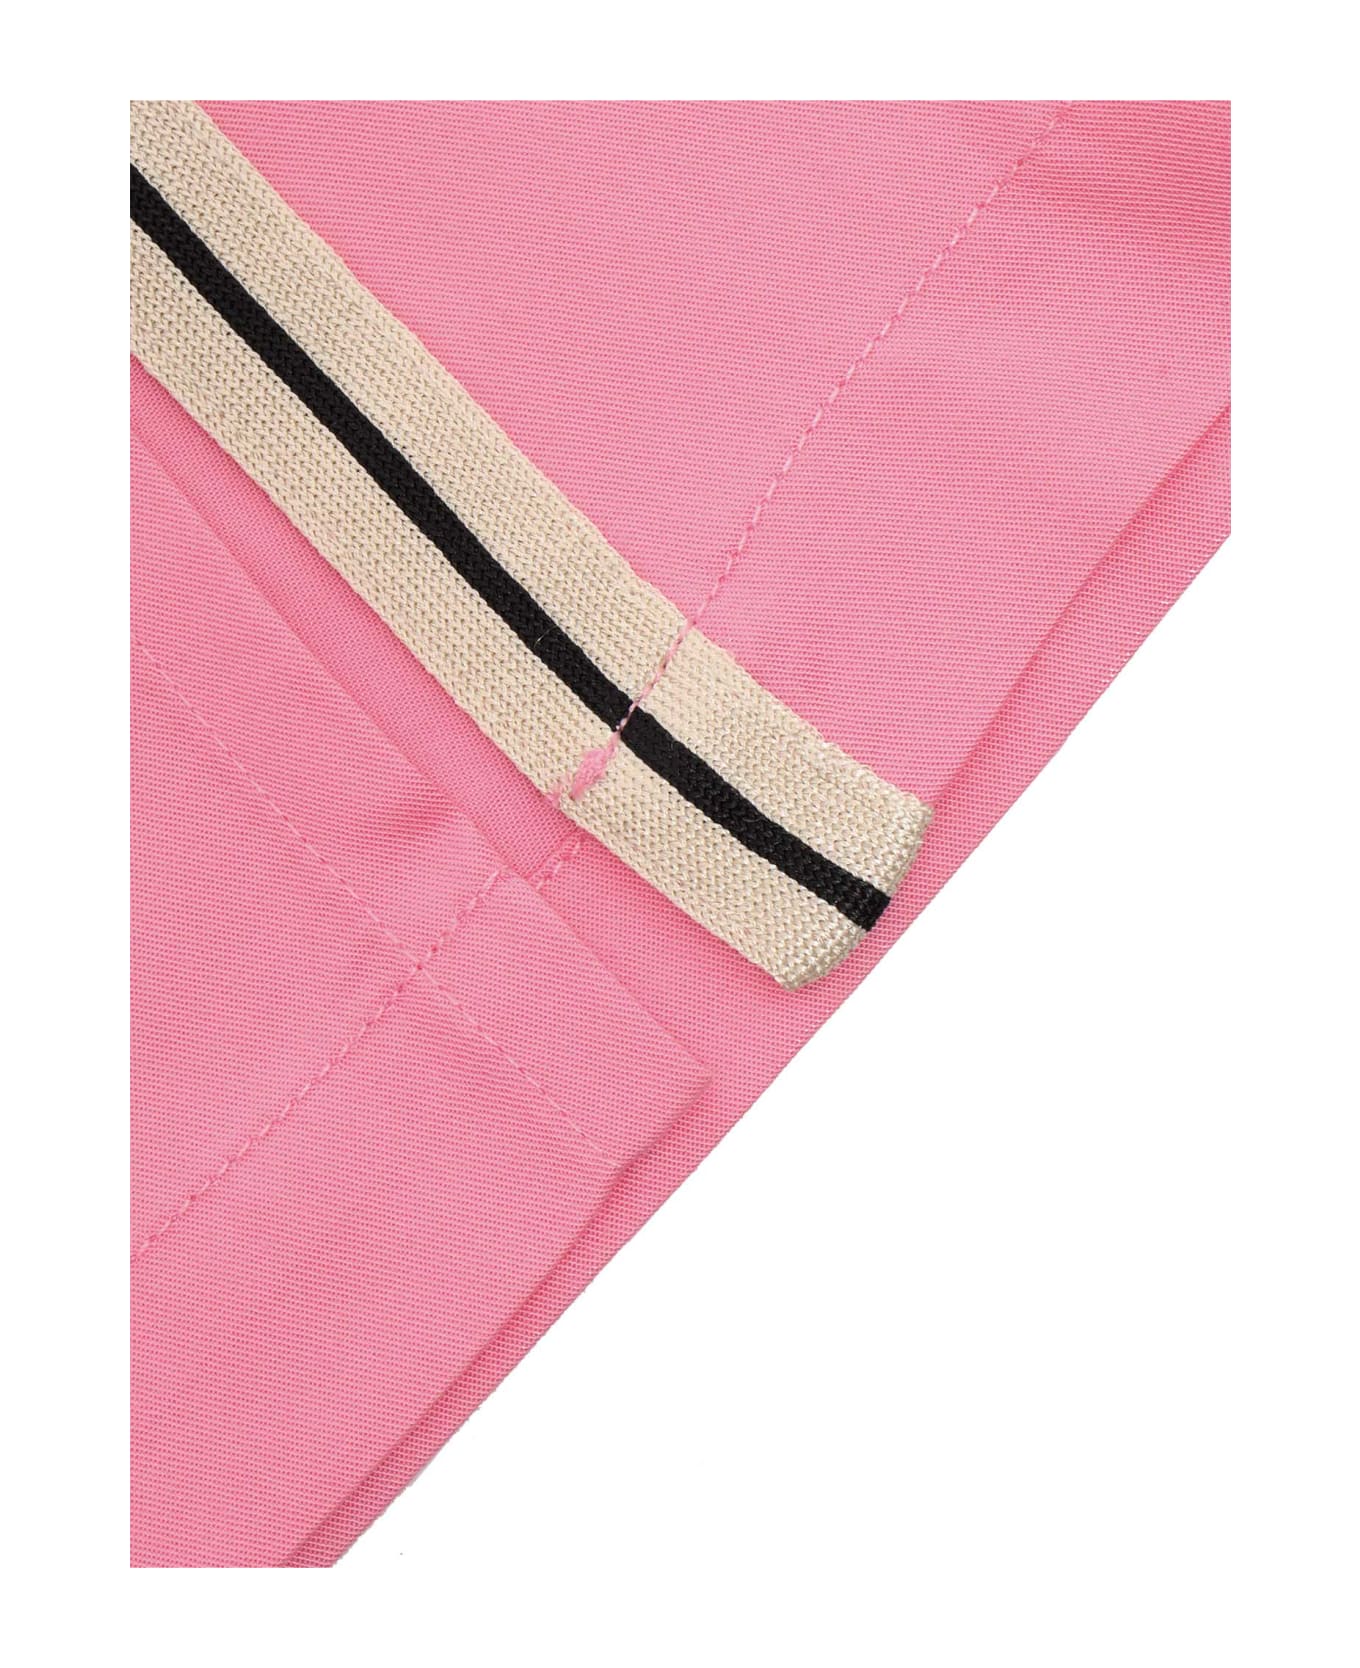 Palm Angels Pink Wide Leg Trousers - PINK